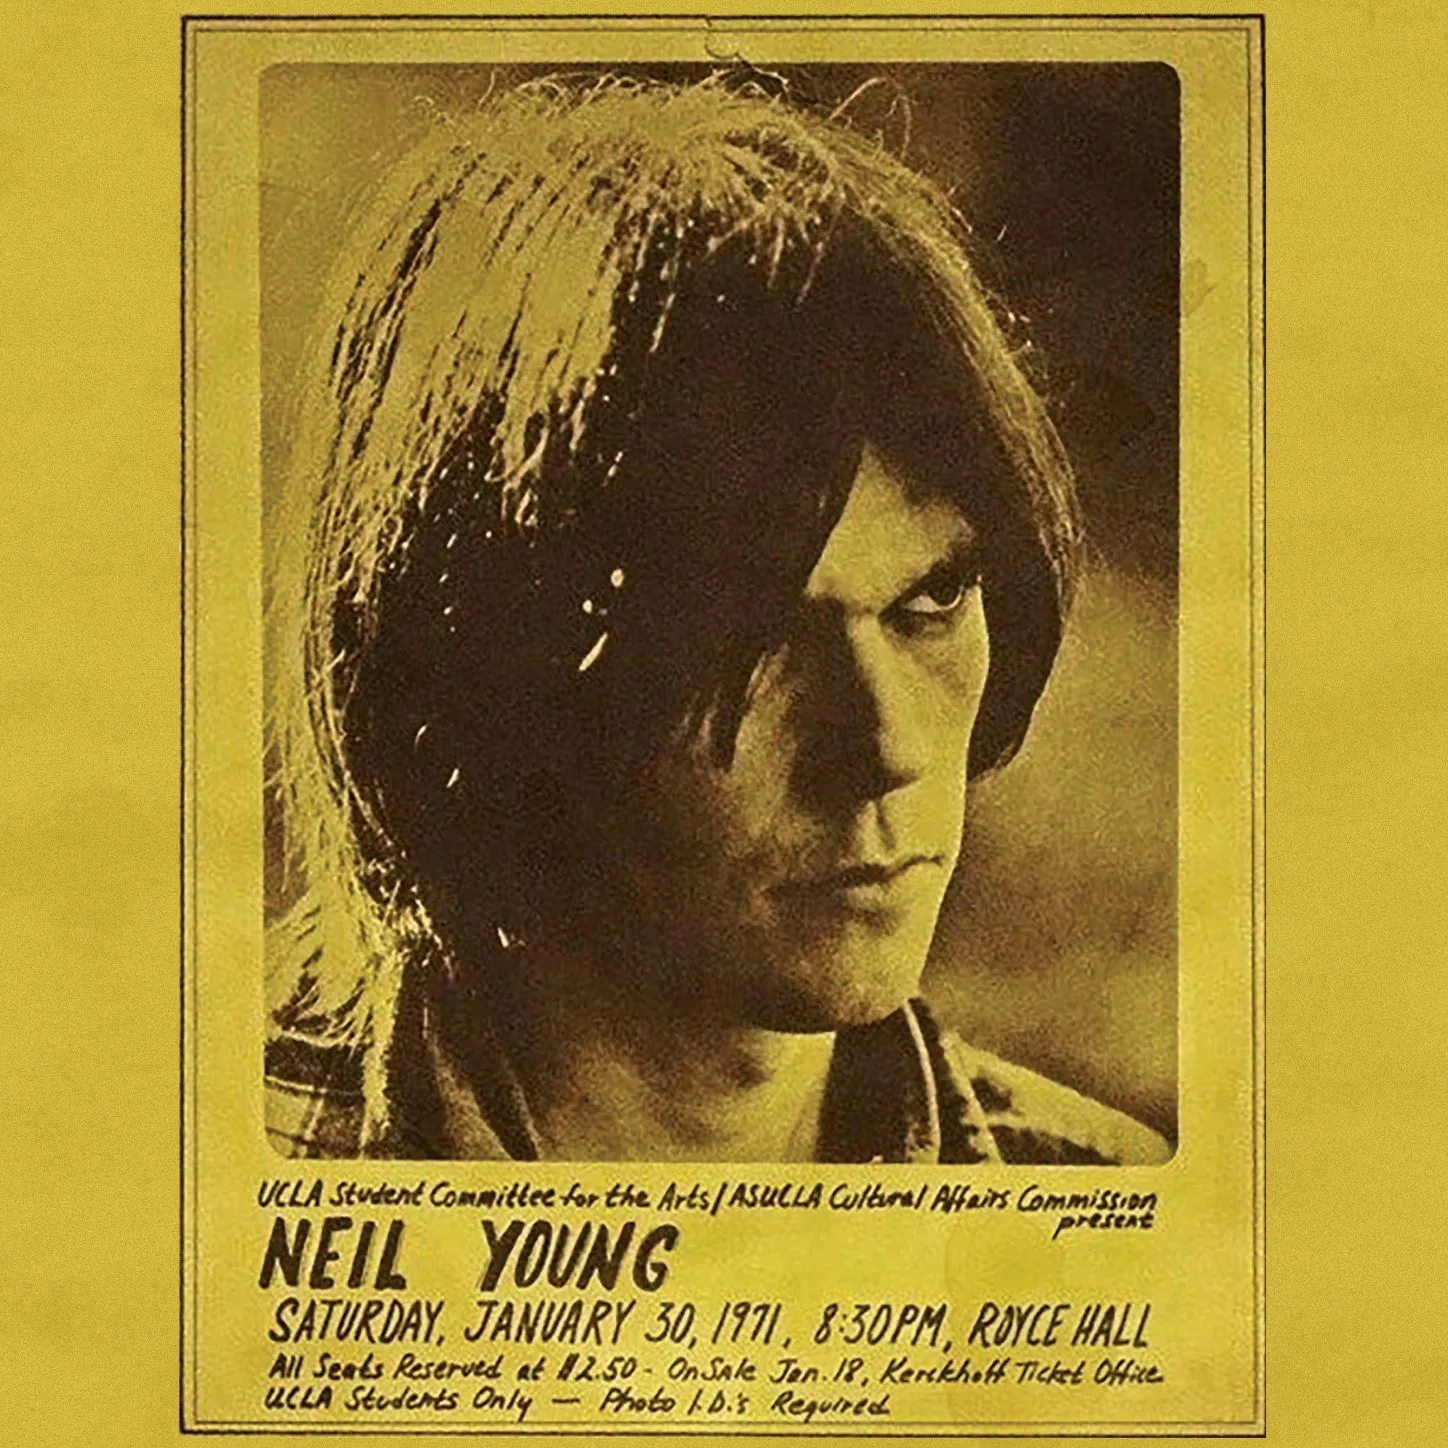 Neil Young - Royce Hall 1971 artwork